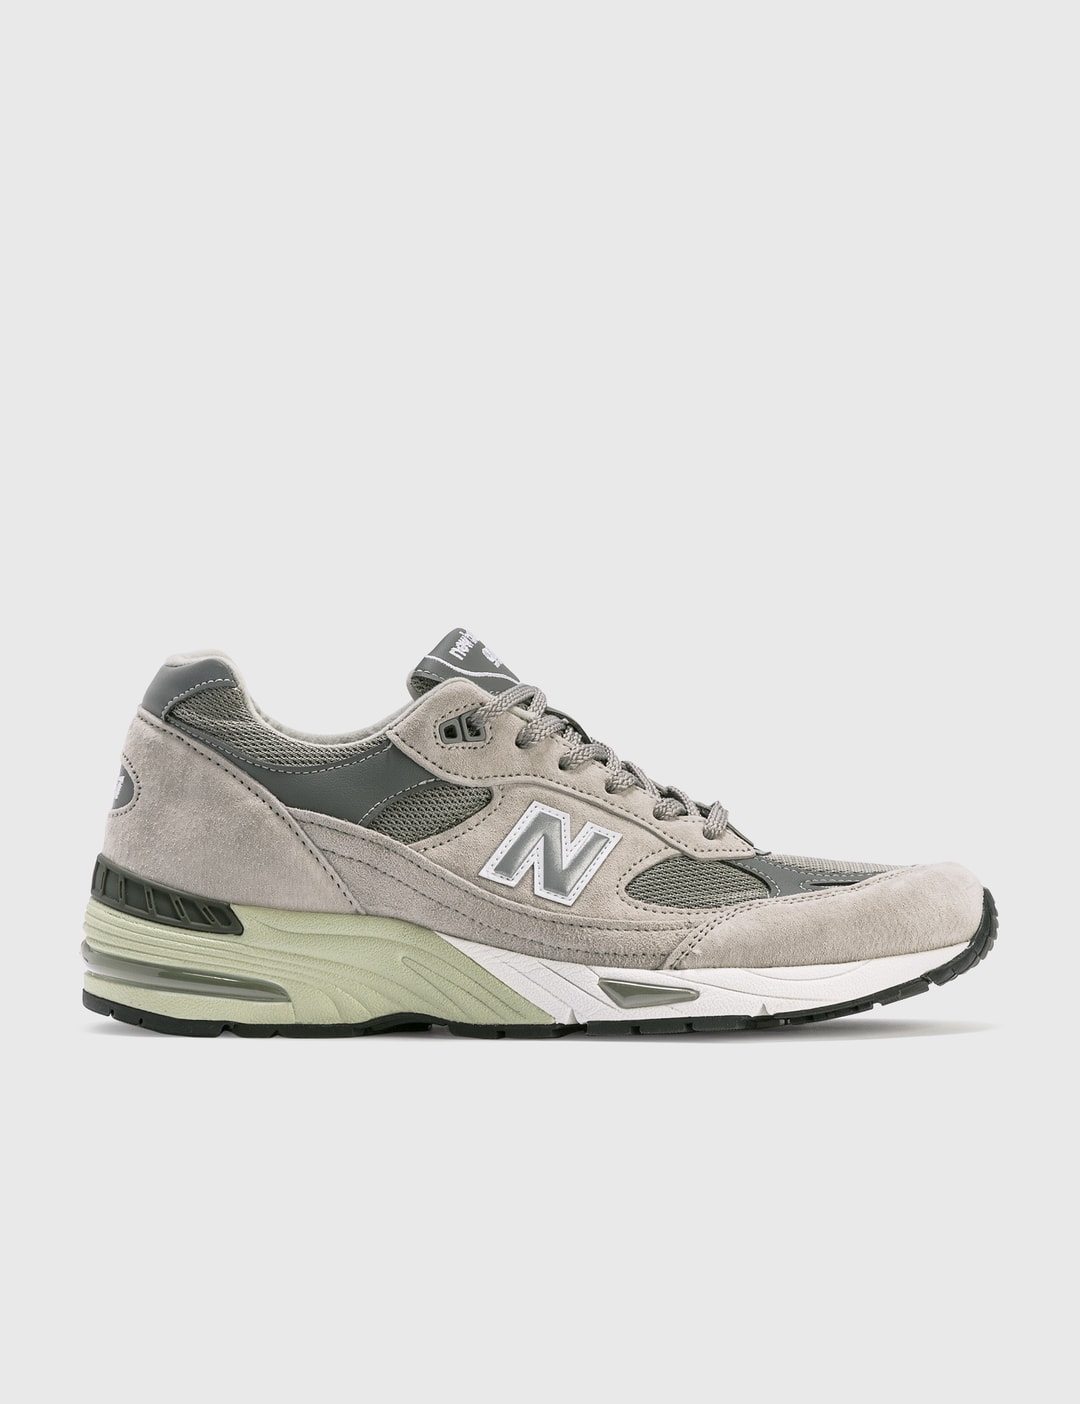 Excursión muñeca descanso New Balance - Made in UK 991 | HBX - Globally Curated Fashion and Lifestyle  by Hypebeast